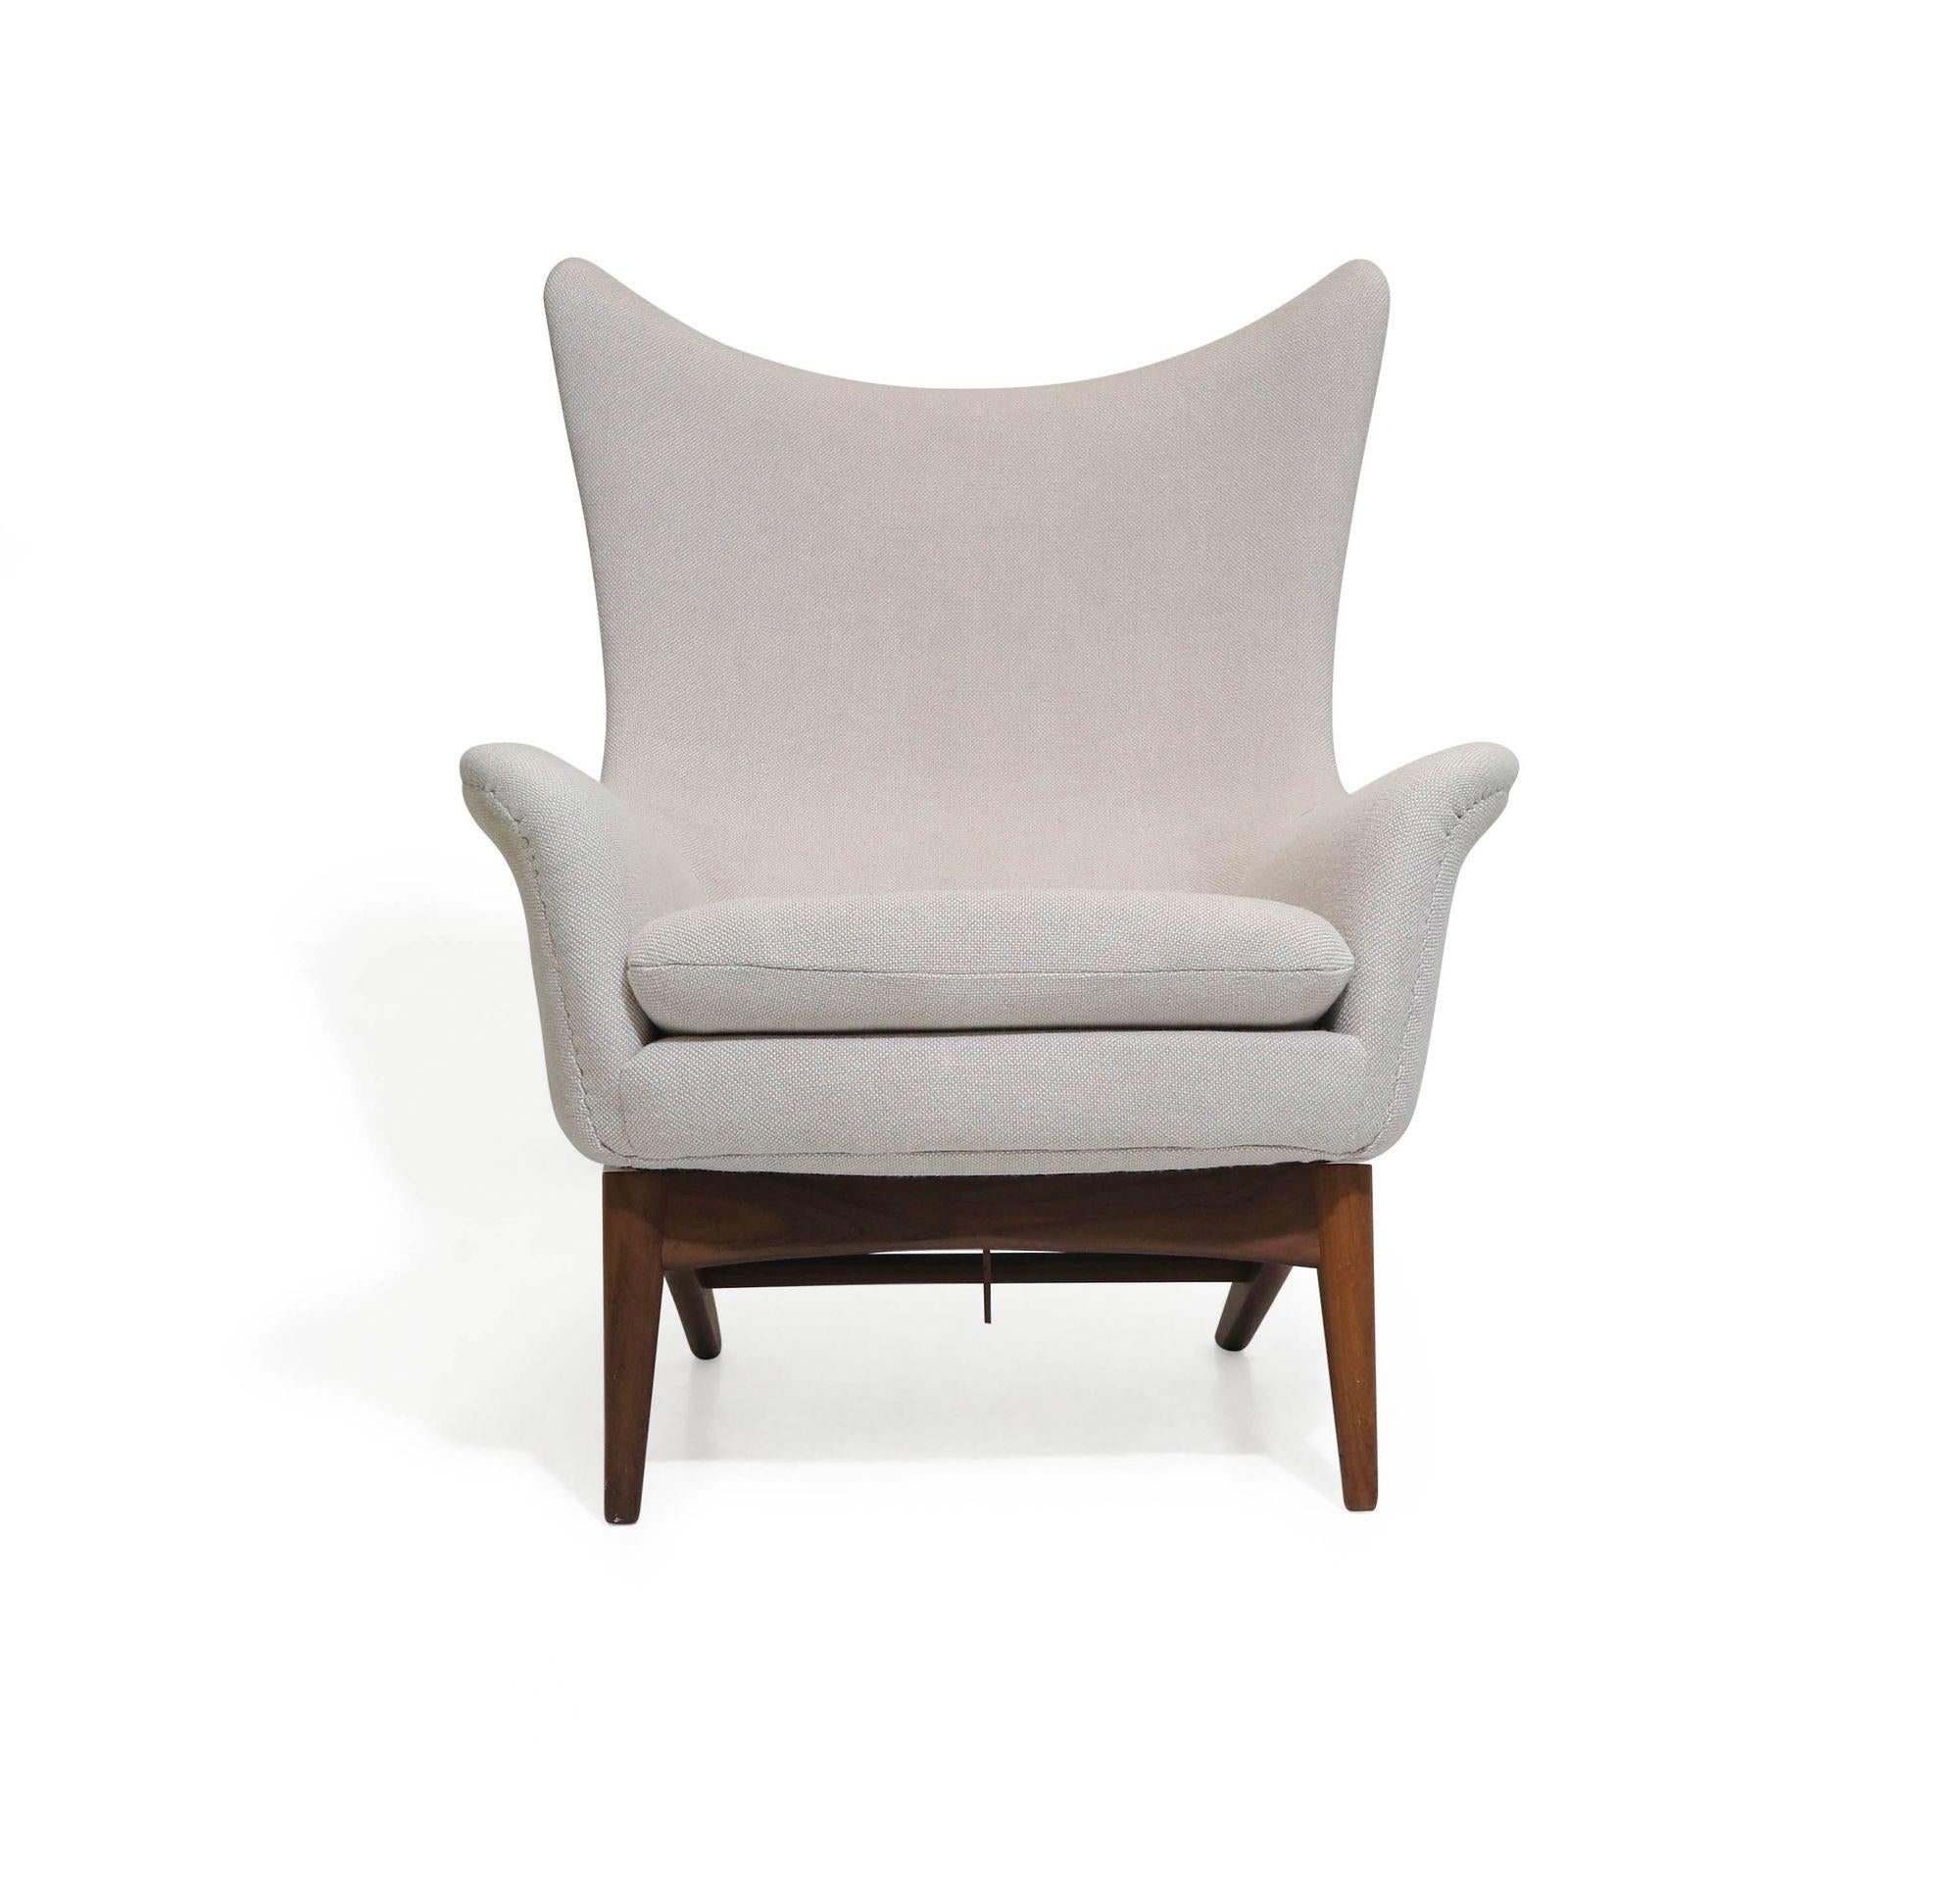 Danish reclining lounge chair designed by H.W Klein for Bramin Moblefabrik, circa 1960 Denmark. The chair is crafted of a solid wood frame with manual reclining mechanism, and upholstered in an off white wool textiles.
Note: Second chair also